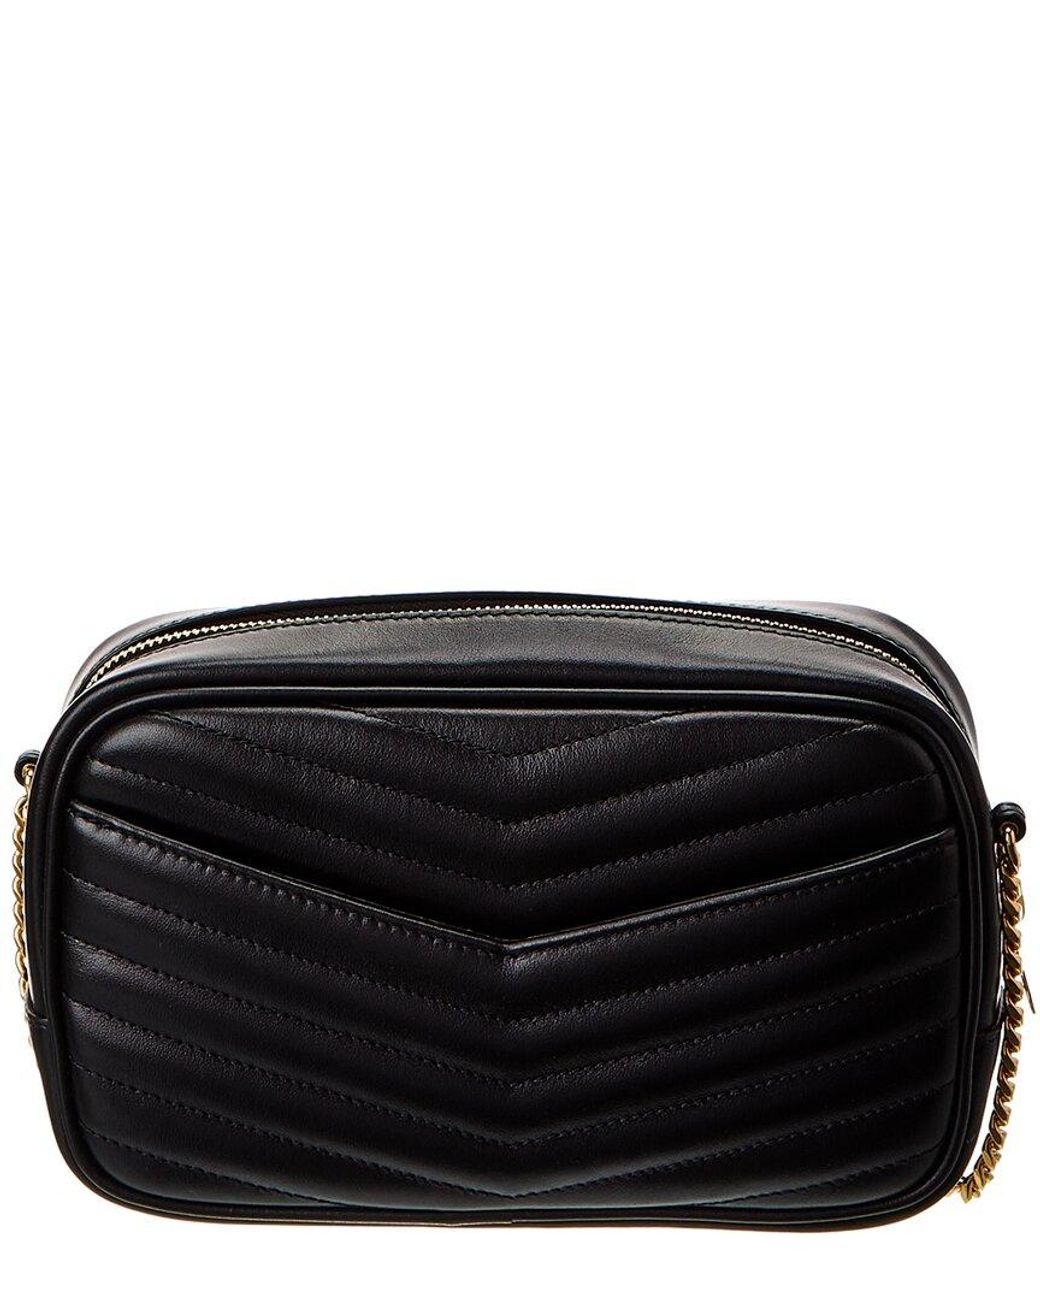 Yves Saint Laurent Mini Lou Quilted Leather Camera Bag in Black, Women's